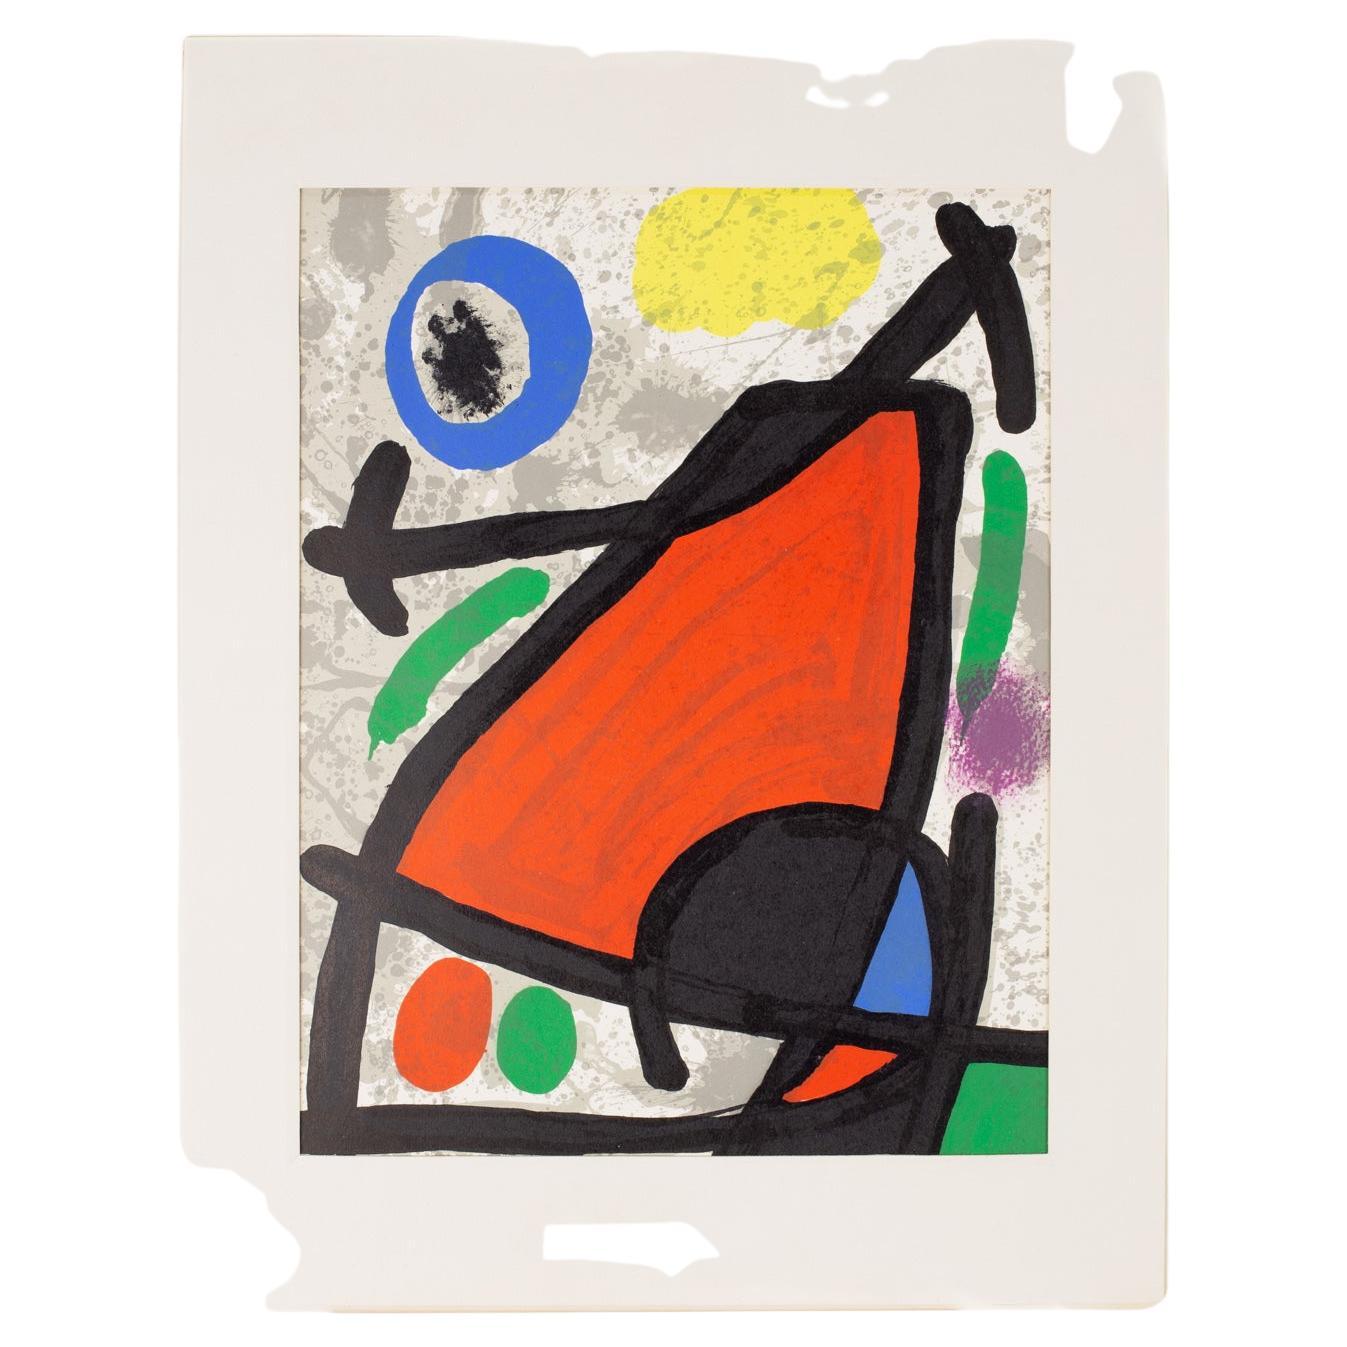 Joan Miro Mid Century Abstract Art Print

This print measures: 14 wide x .25 deep x 18 inches high

This print is in Excellent Vintage Condition with minor marks, dents, and wear.

We take our photos in a controlled lighting studio to show as